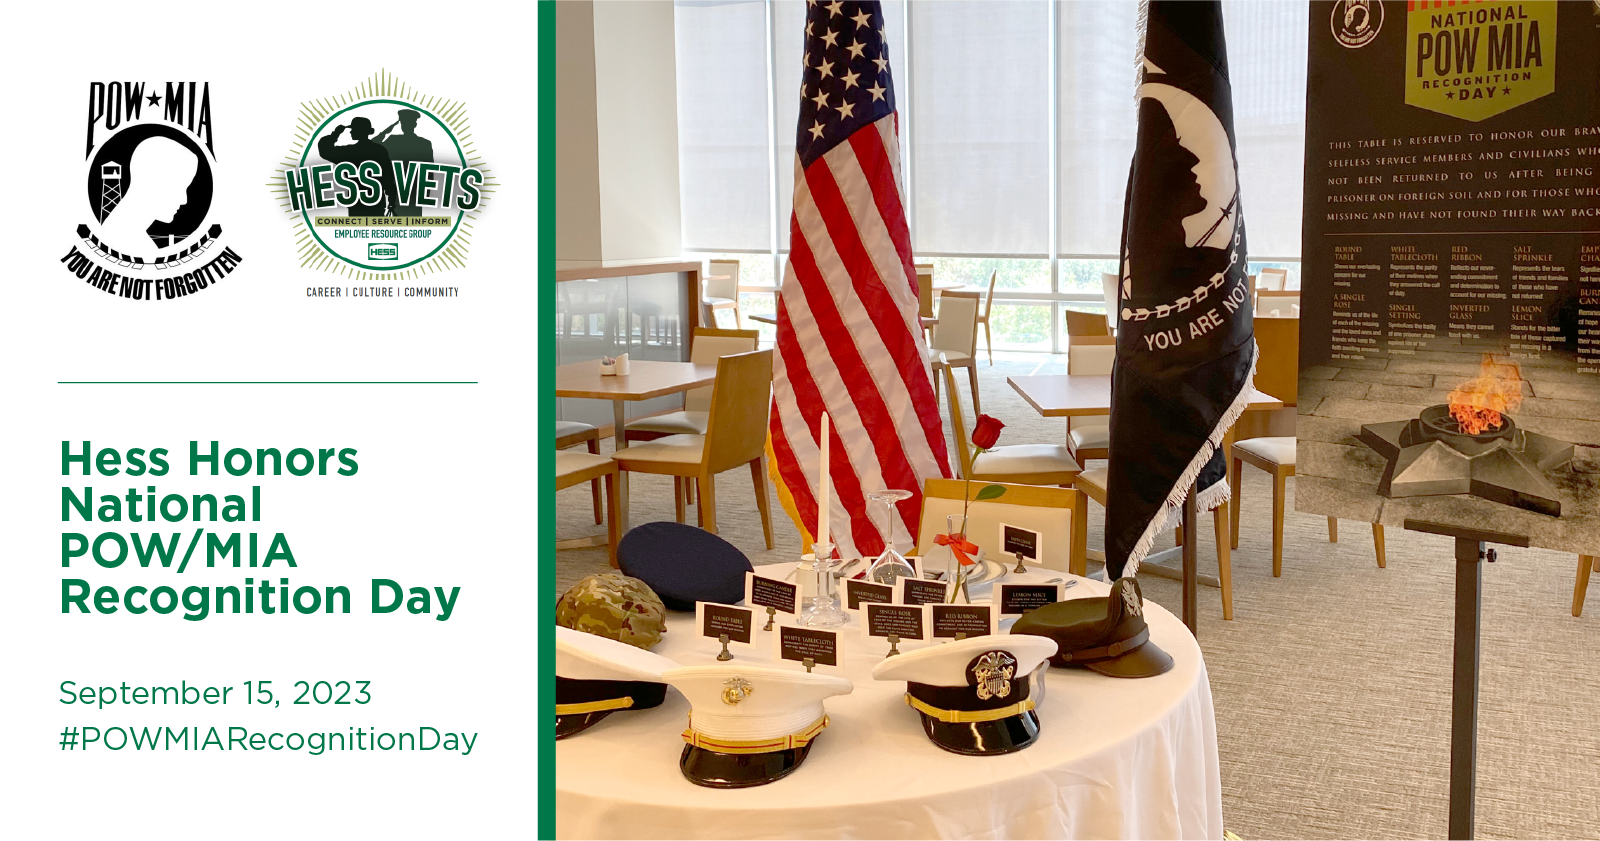 Hess Observes National POW/MIA Recognition Day